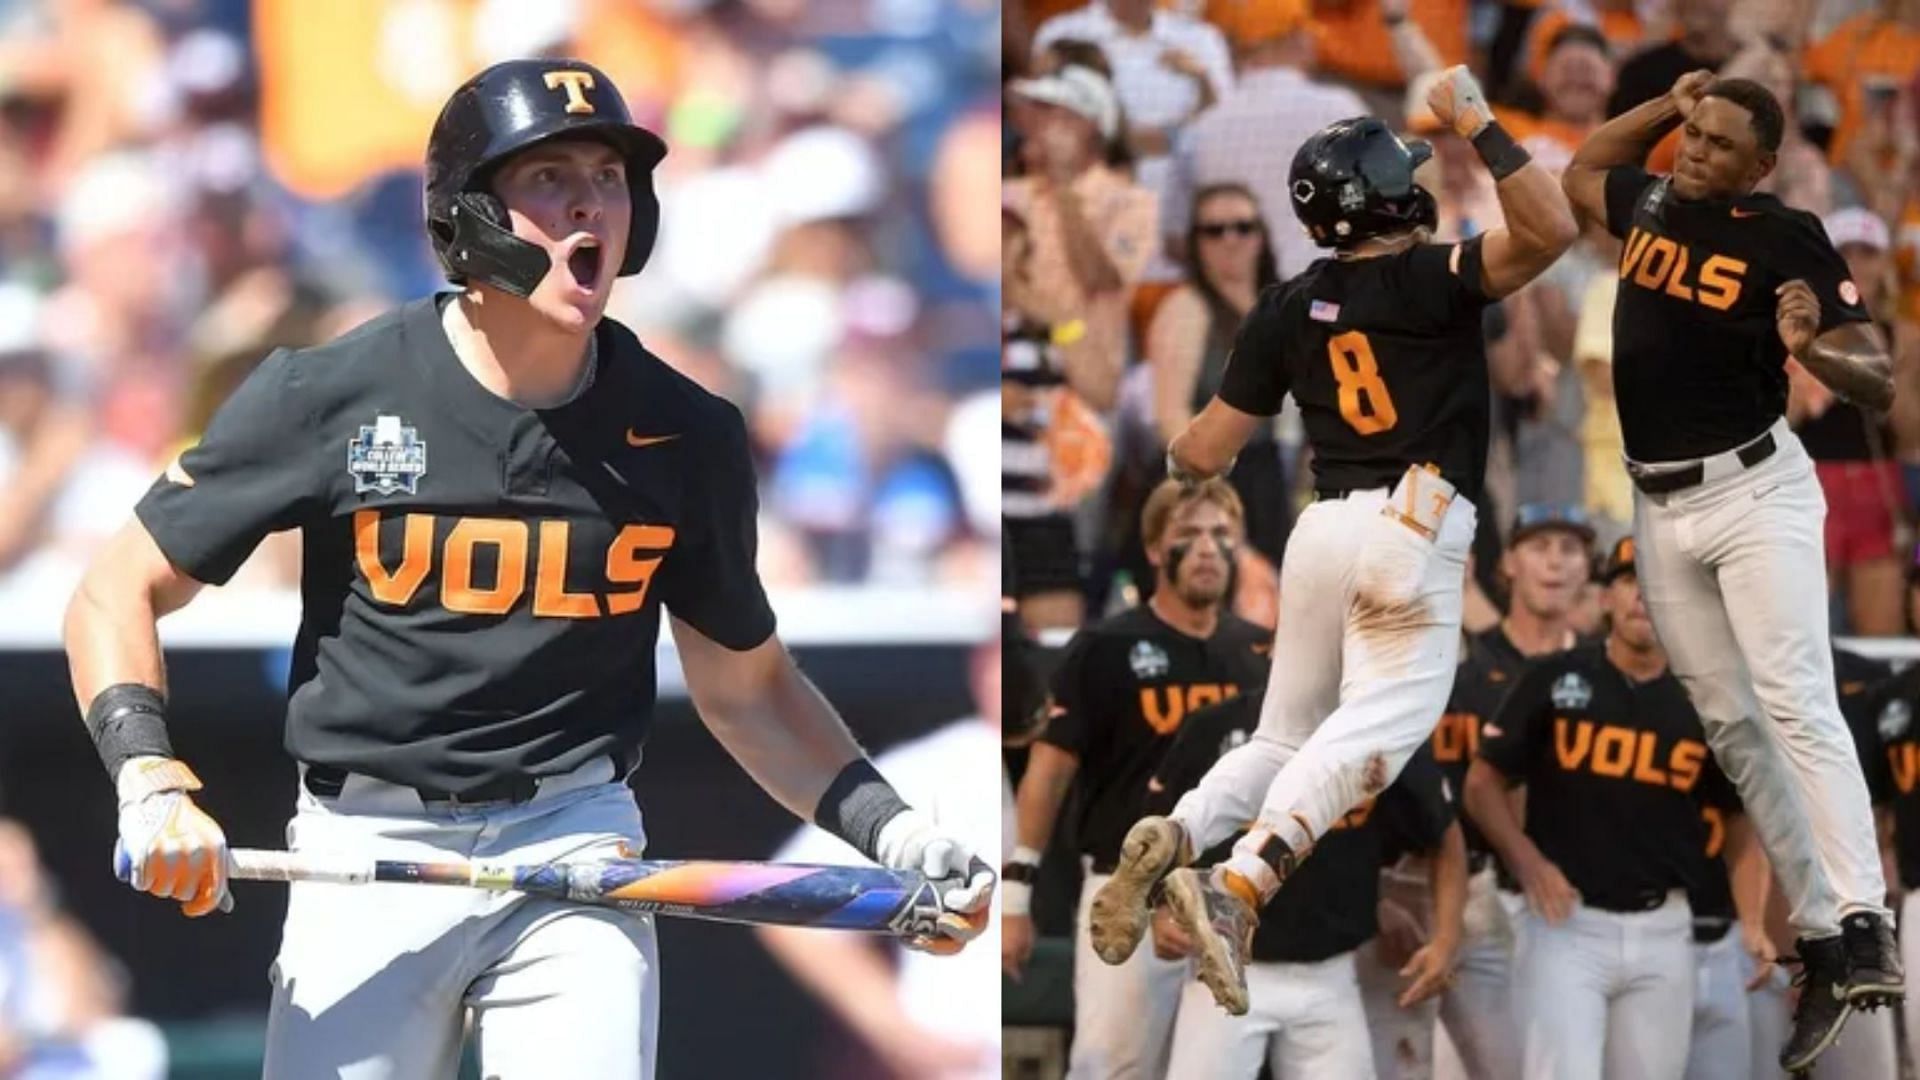 Dylan Dreiling crushed a two-run home run in the seventh inning to lead Tennessee to their first-ever national championship. (Image Source: IMAGN)